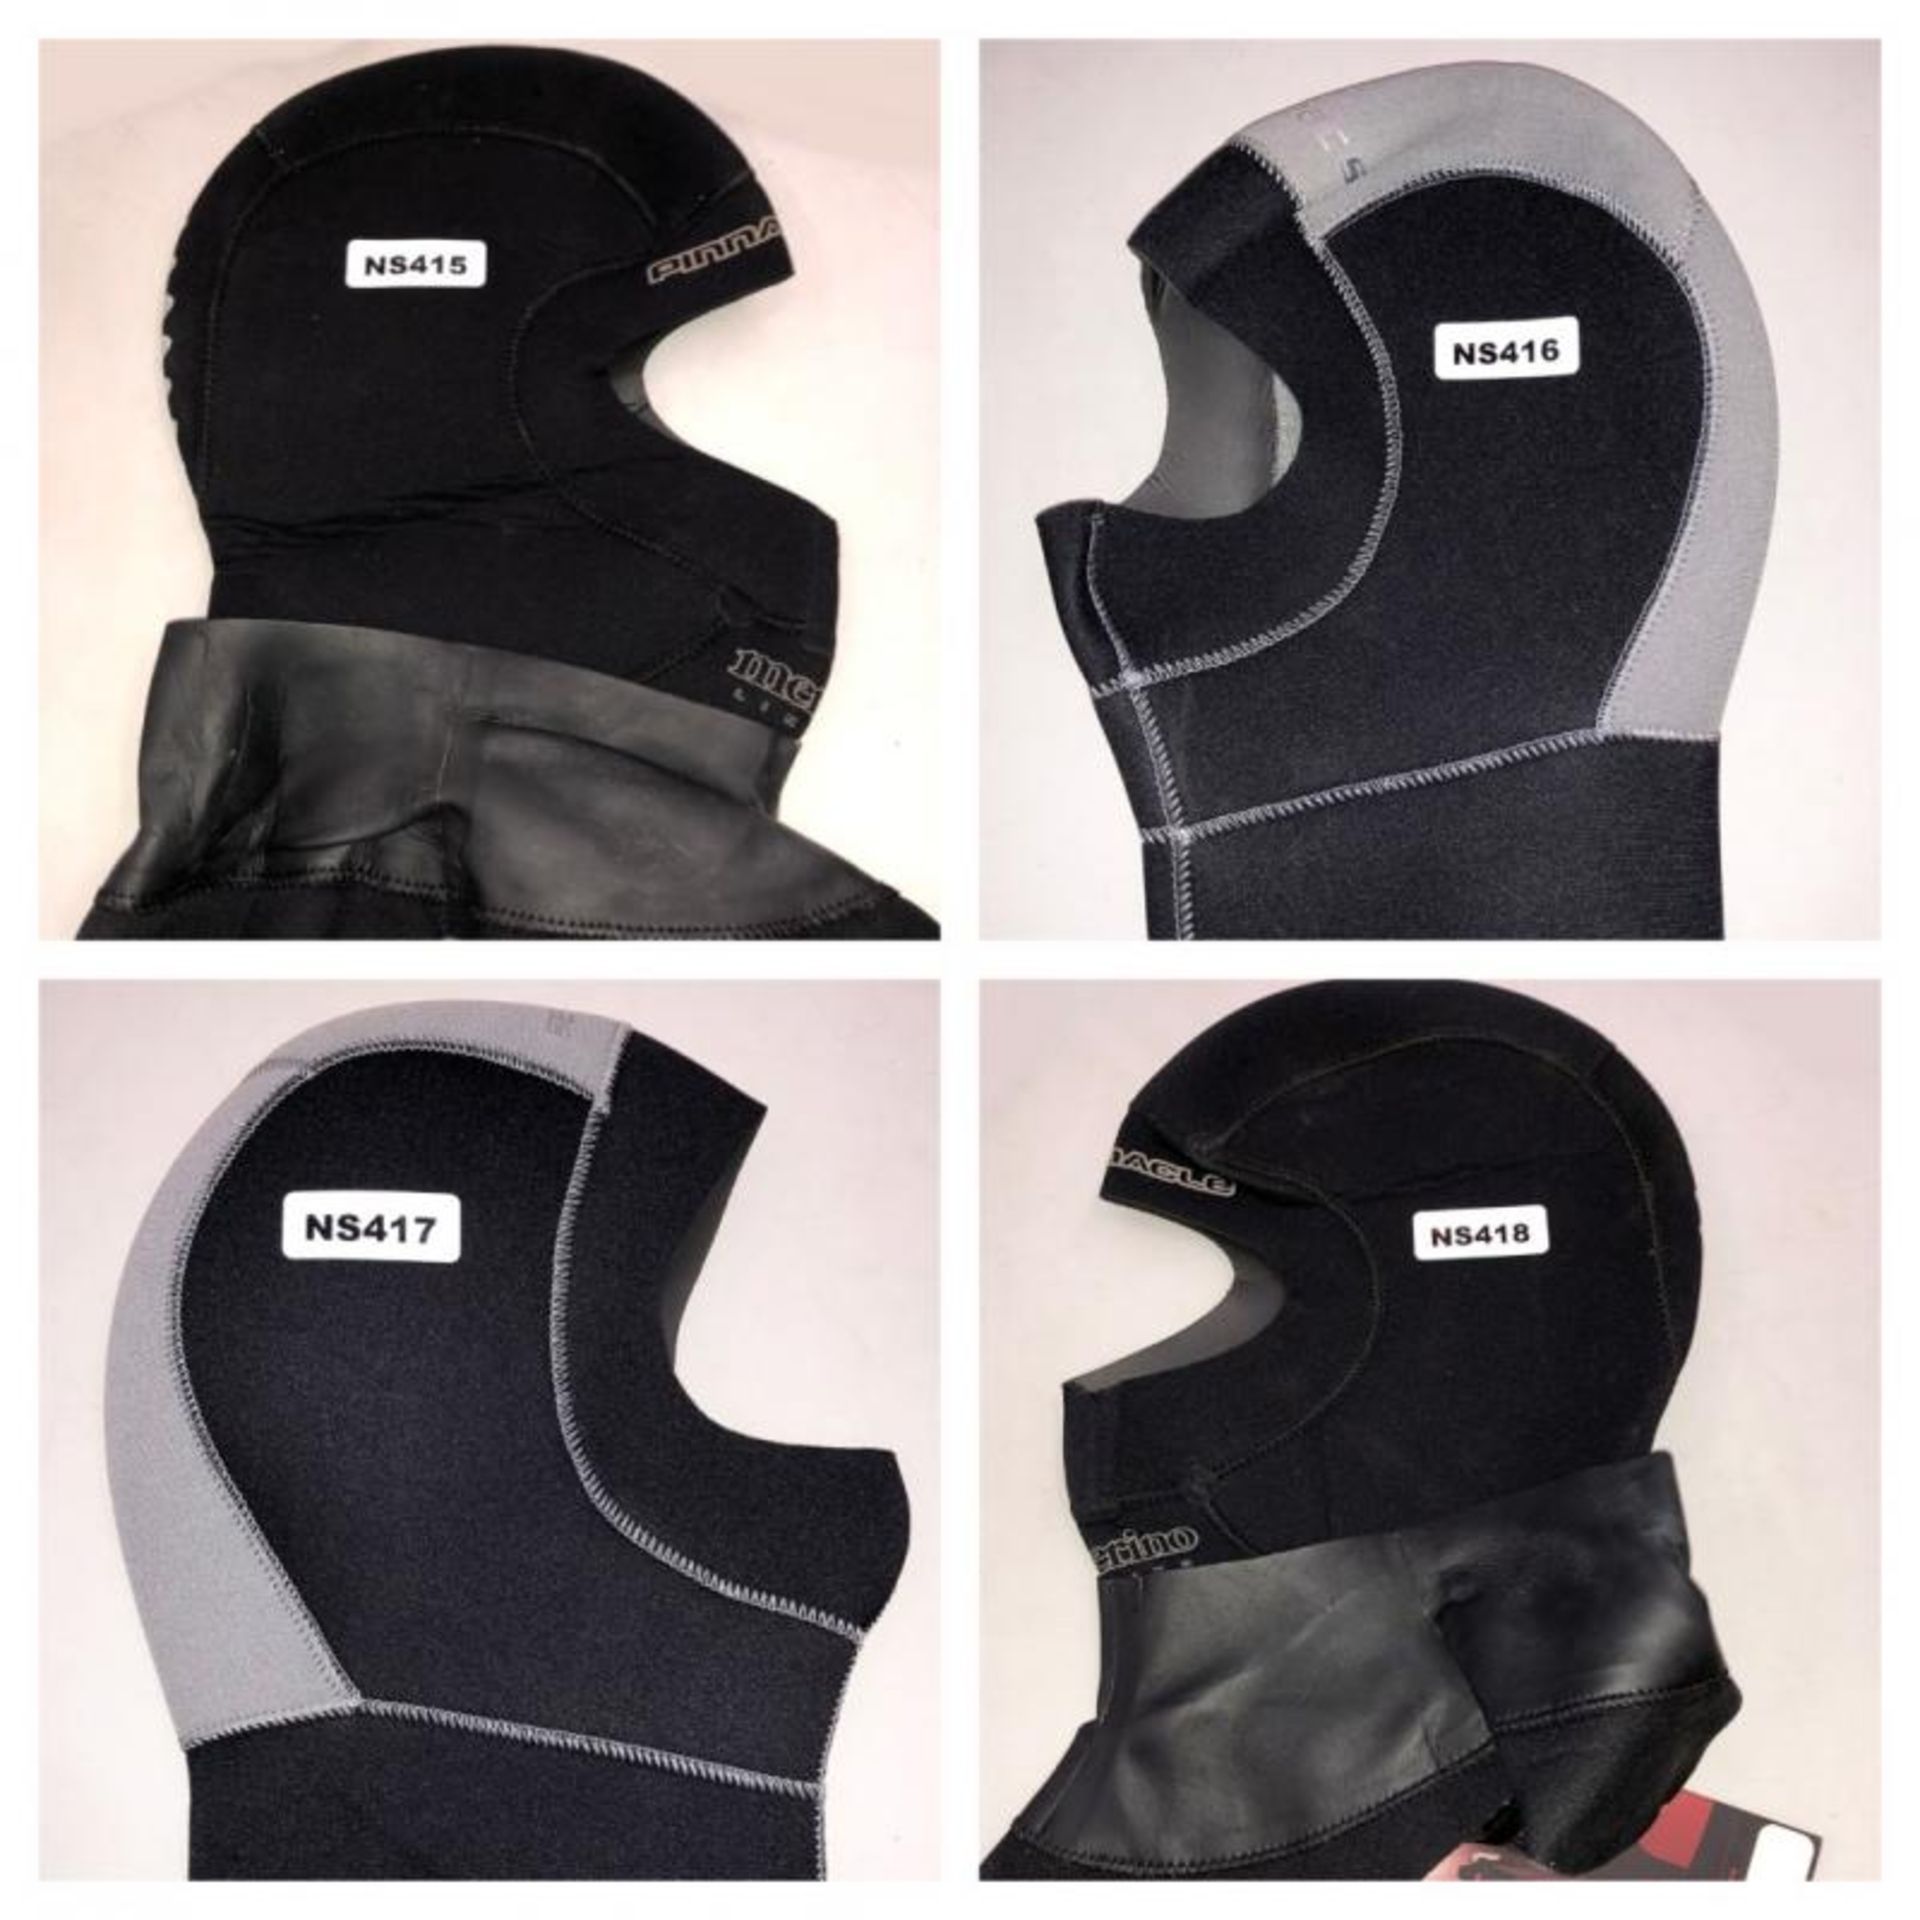 4 x Small New Diving Hoods - Ref: NS415, NS416, NS417, NS418 - CL349 - Location: Altrincham WA14